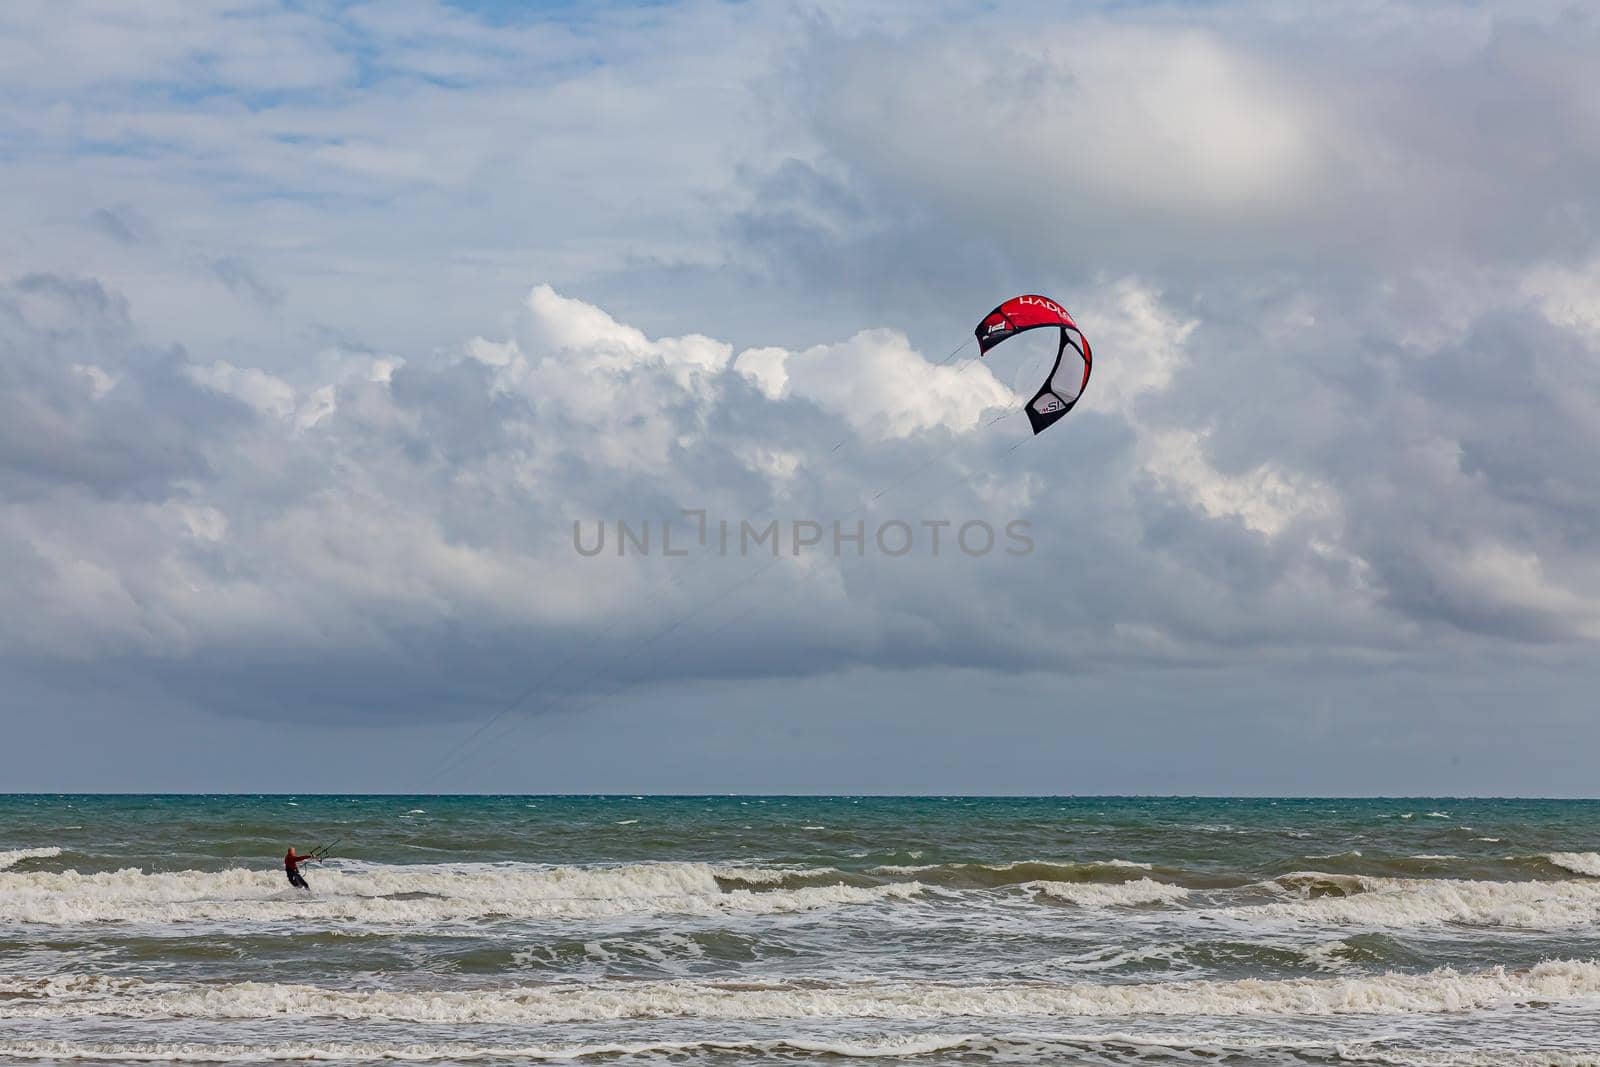 Professional kiter makes the difficult trick on a beautiful background. Kitesurfing Kiteboarding action photos man among waves quickly goes by Milanchikov